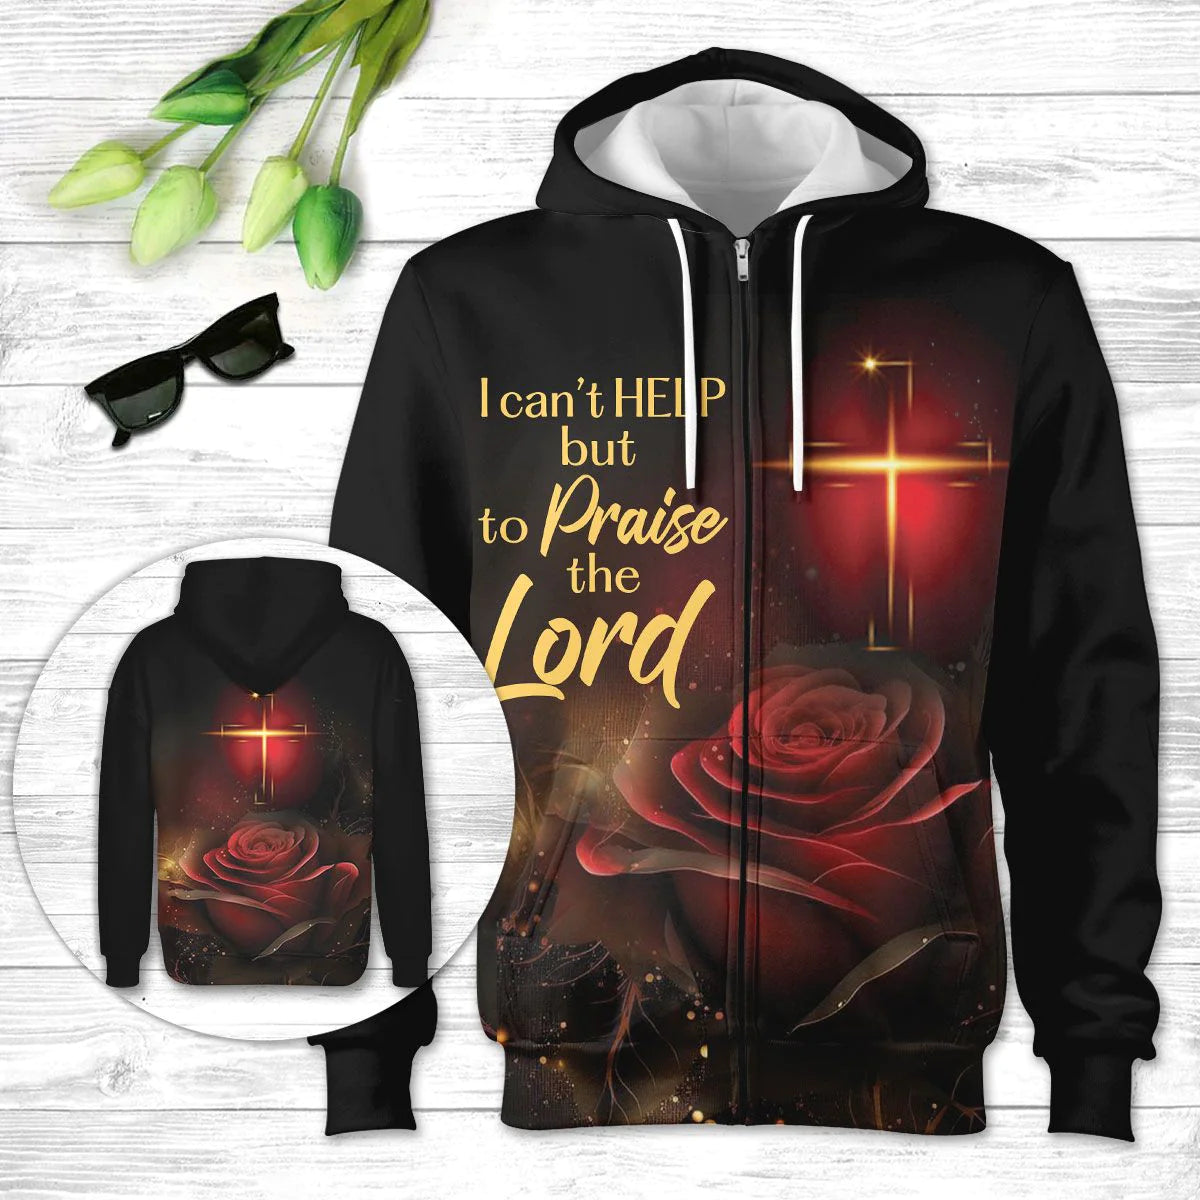 Christianartbag Clothing, I Can't Help But To Praise The Lord, Christian 3D T-Shirt, Christian 3D Hoodie, Christian 3D Sweater, Unisex 3D T-Shirt. - Christian Art Bag